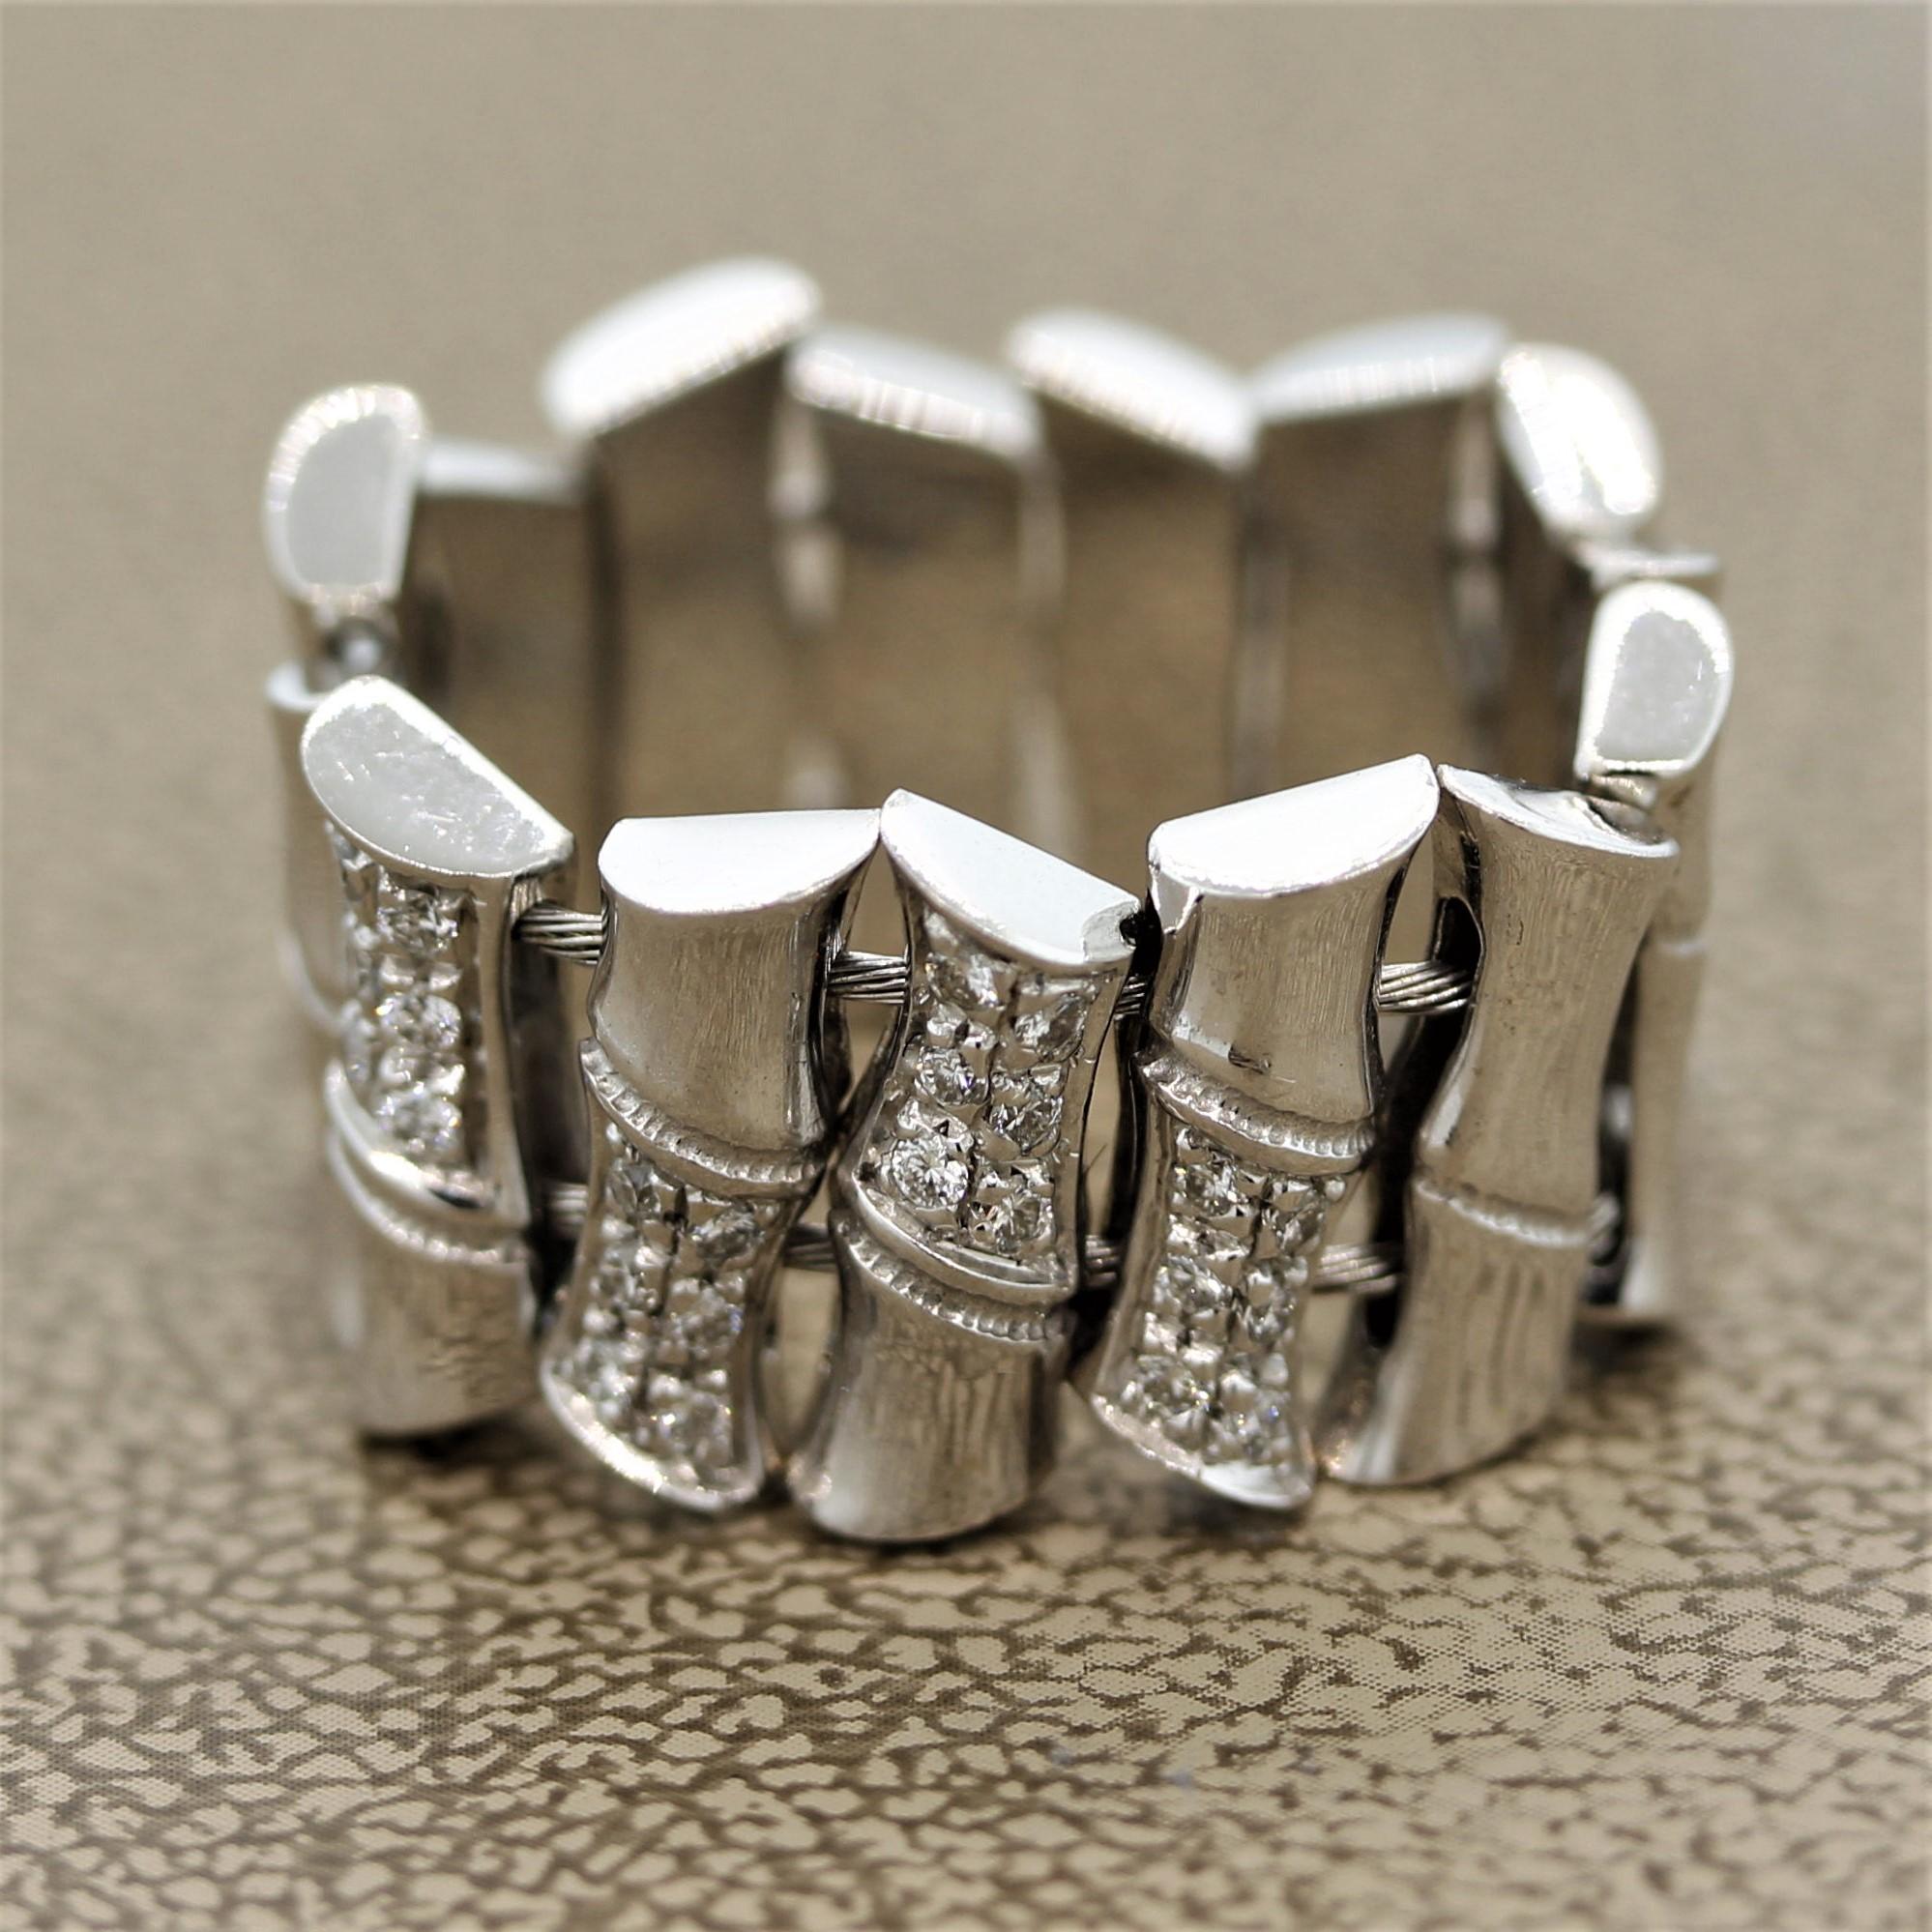 An original piece by Gucci, this ring features 0.24 carats of round brilliant cut diamonds. They are set in 18k white gold bamboo shoots which each move freely from one another. The band has a slight stretch to it allowing it to be worn with